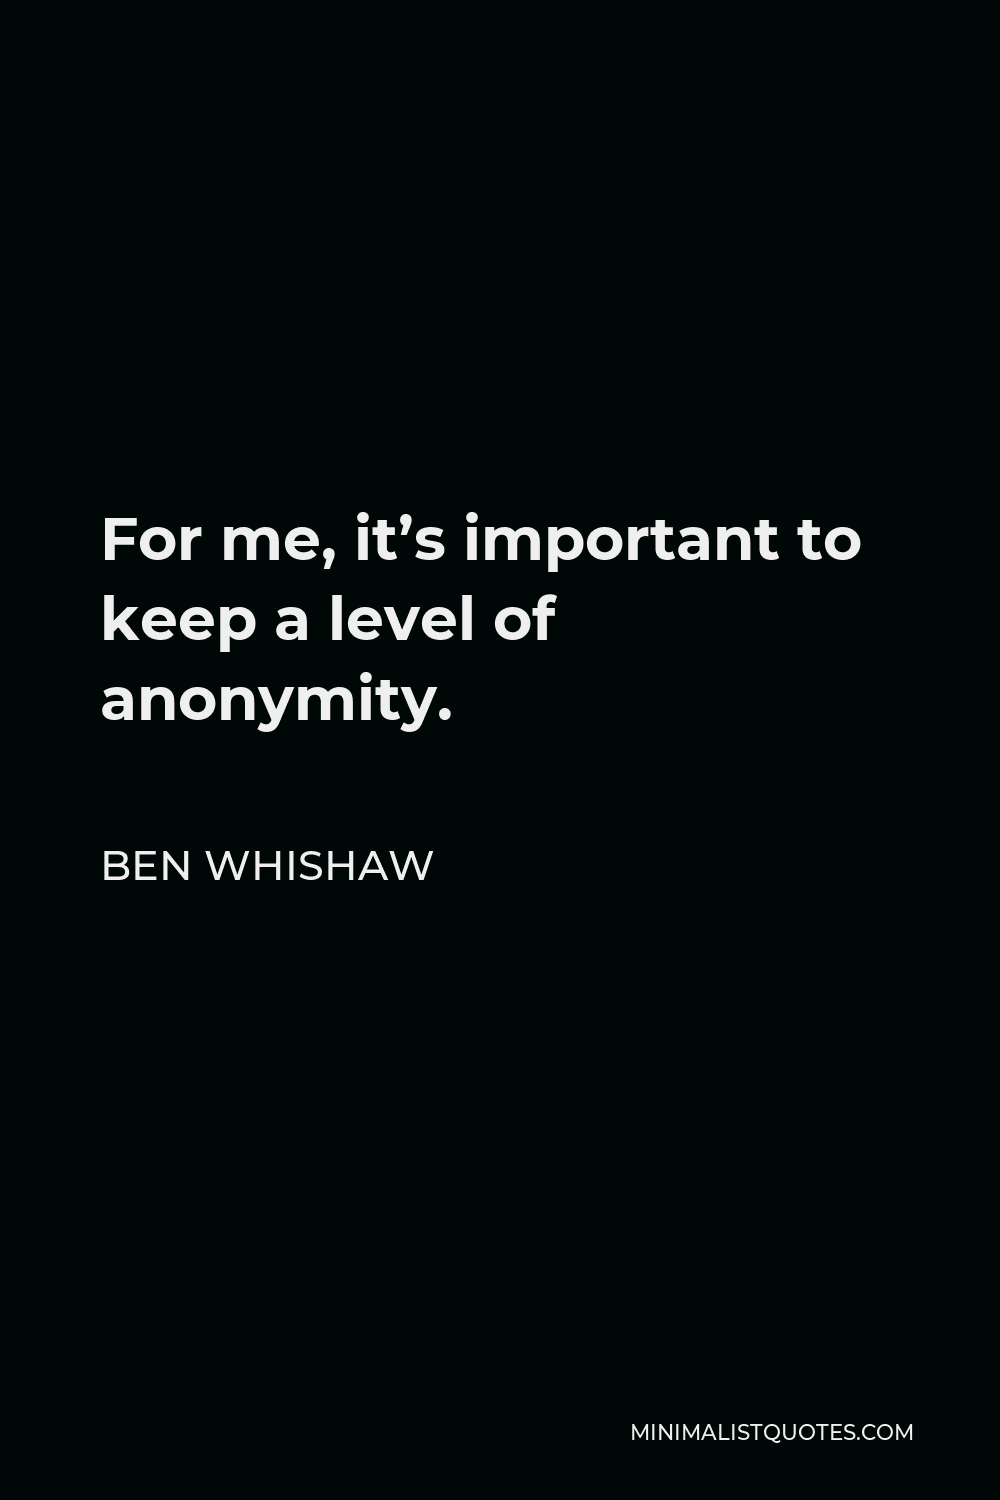 Ben Whishaw Quote - For me, it’s important to keep a level of anonymity.